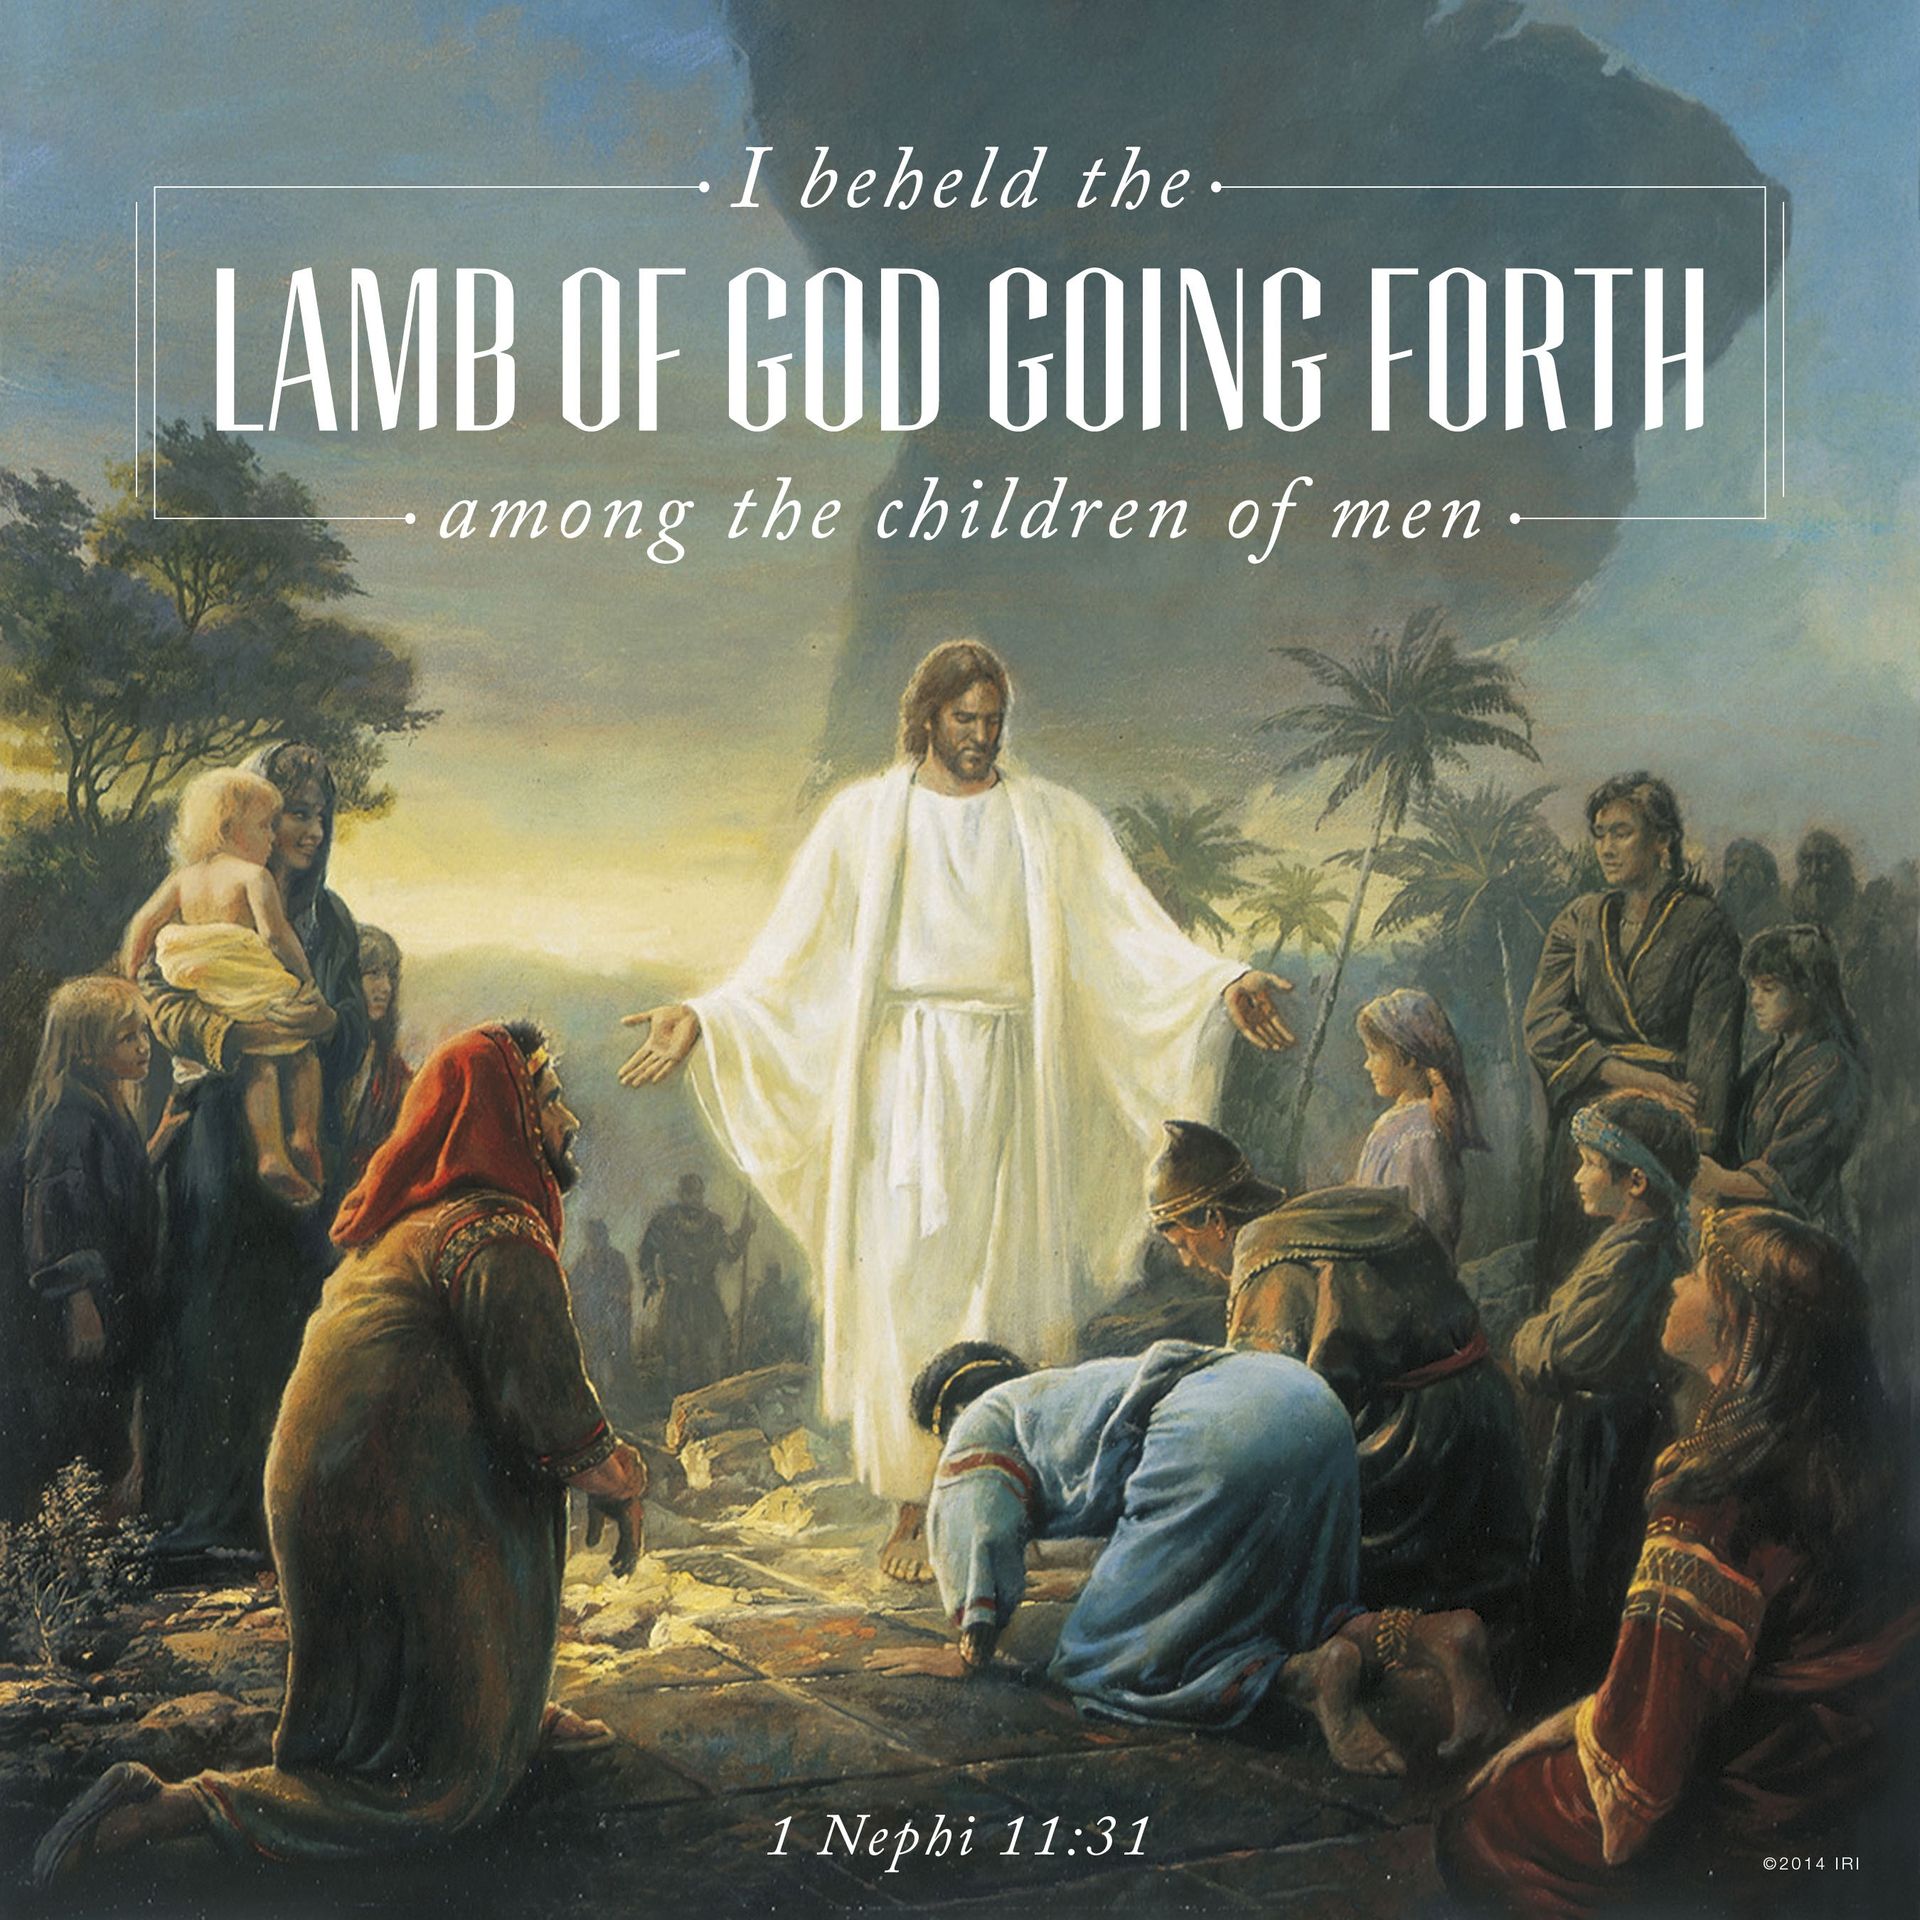 “I beheld the Lamb of God going forth among the children of men.”—1 Nephi 11:31 © undefined ipCode 1.